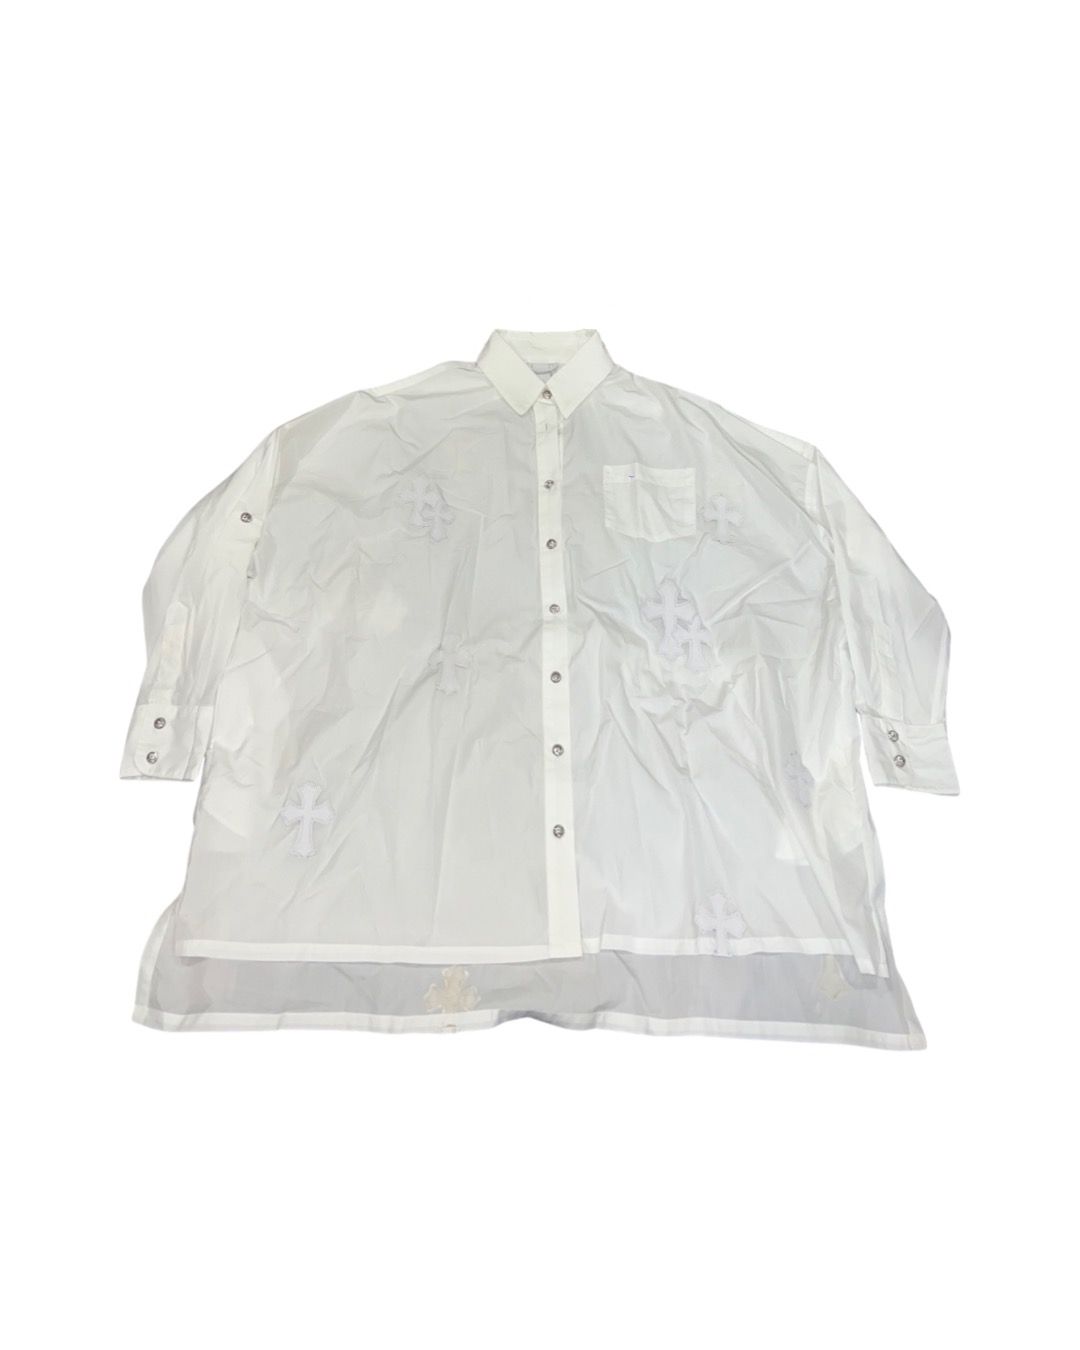 Mahal Kita white leather cross patch button up shirt - 1